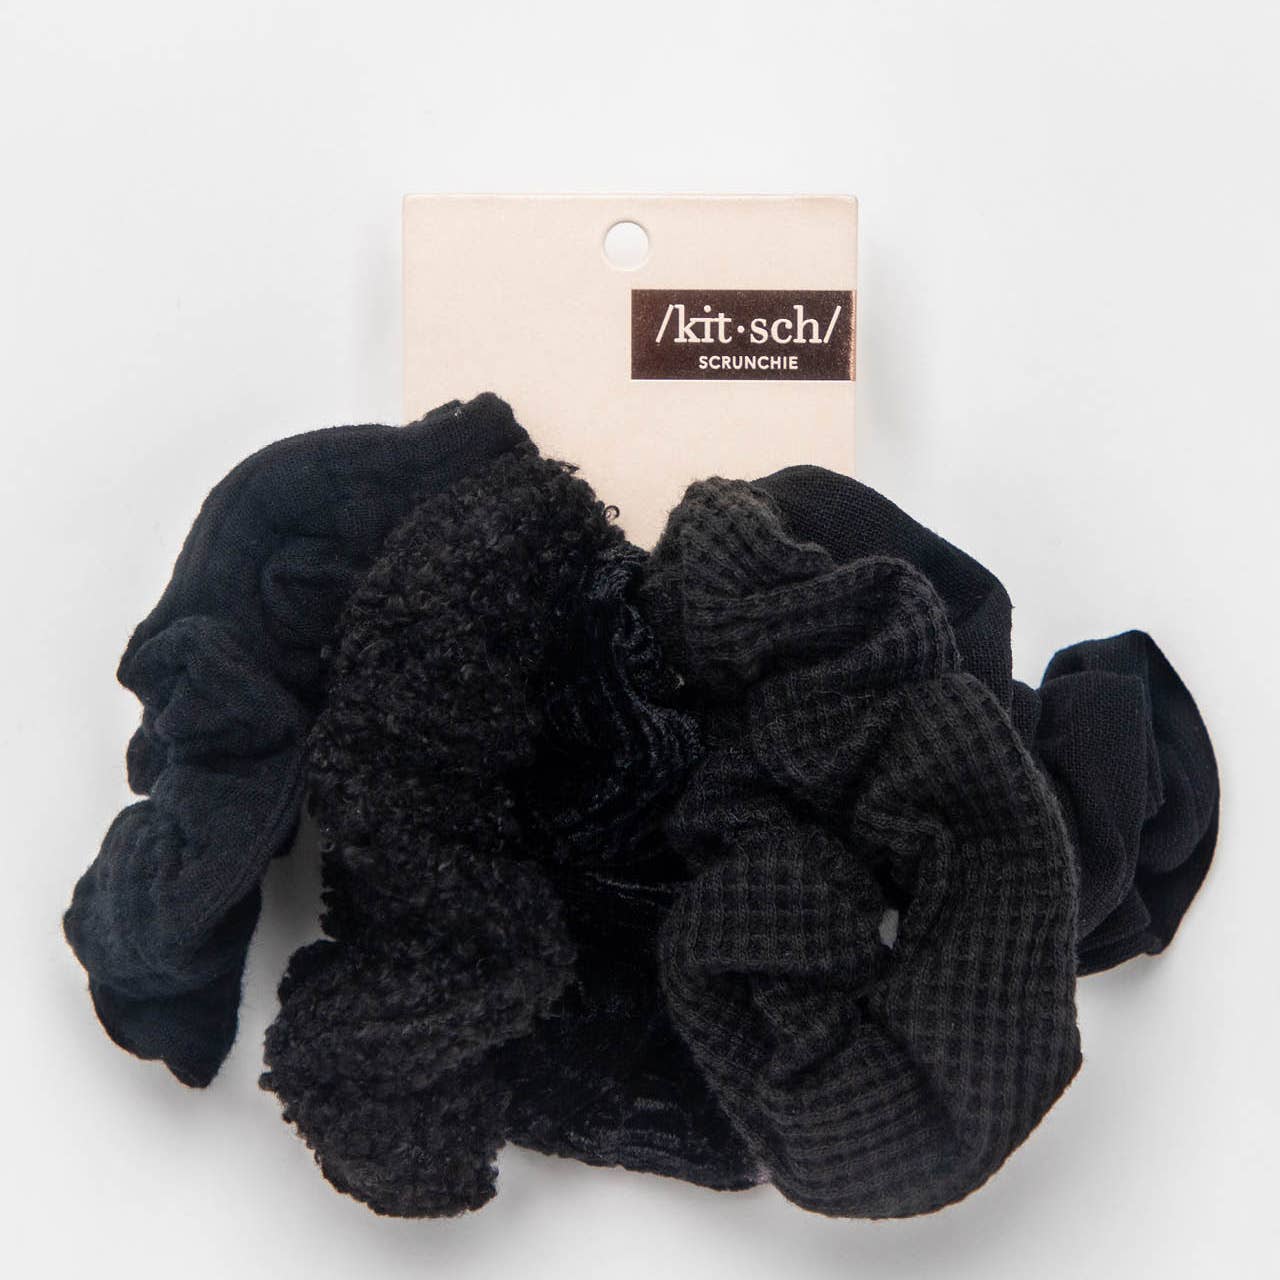 Black Assorted Textured Scrunchies 5 pack